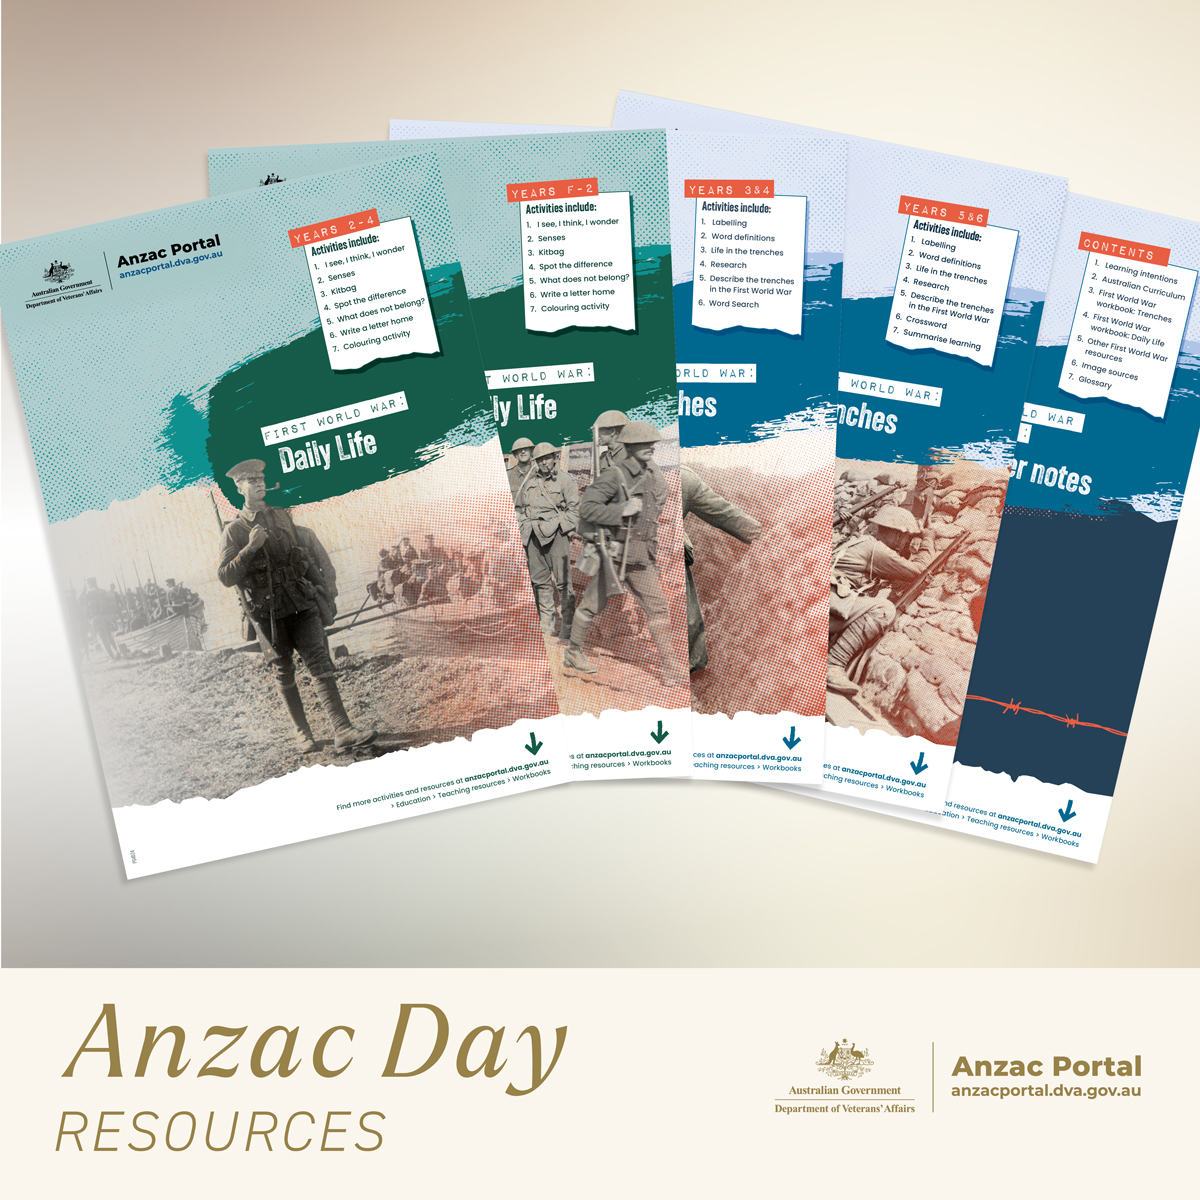 Annually, we distribute a commemorative pack to schools, ex-service organisations, and other associations for Anzac Day. These resources cover elements of military service and daily life during and outside wars and conflicts. To find out more, visit: anzacportal.dva.gov.au/commemoration/…